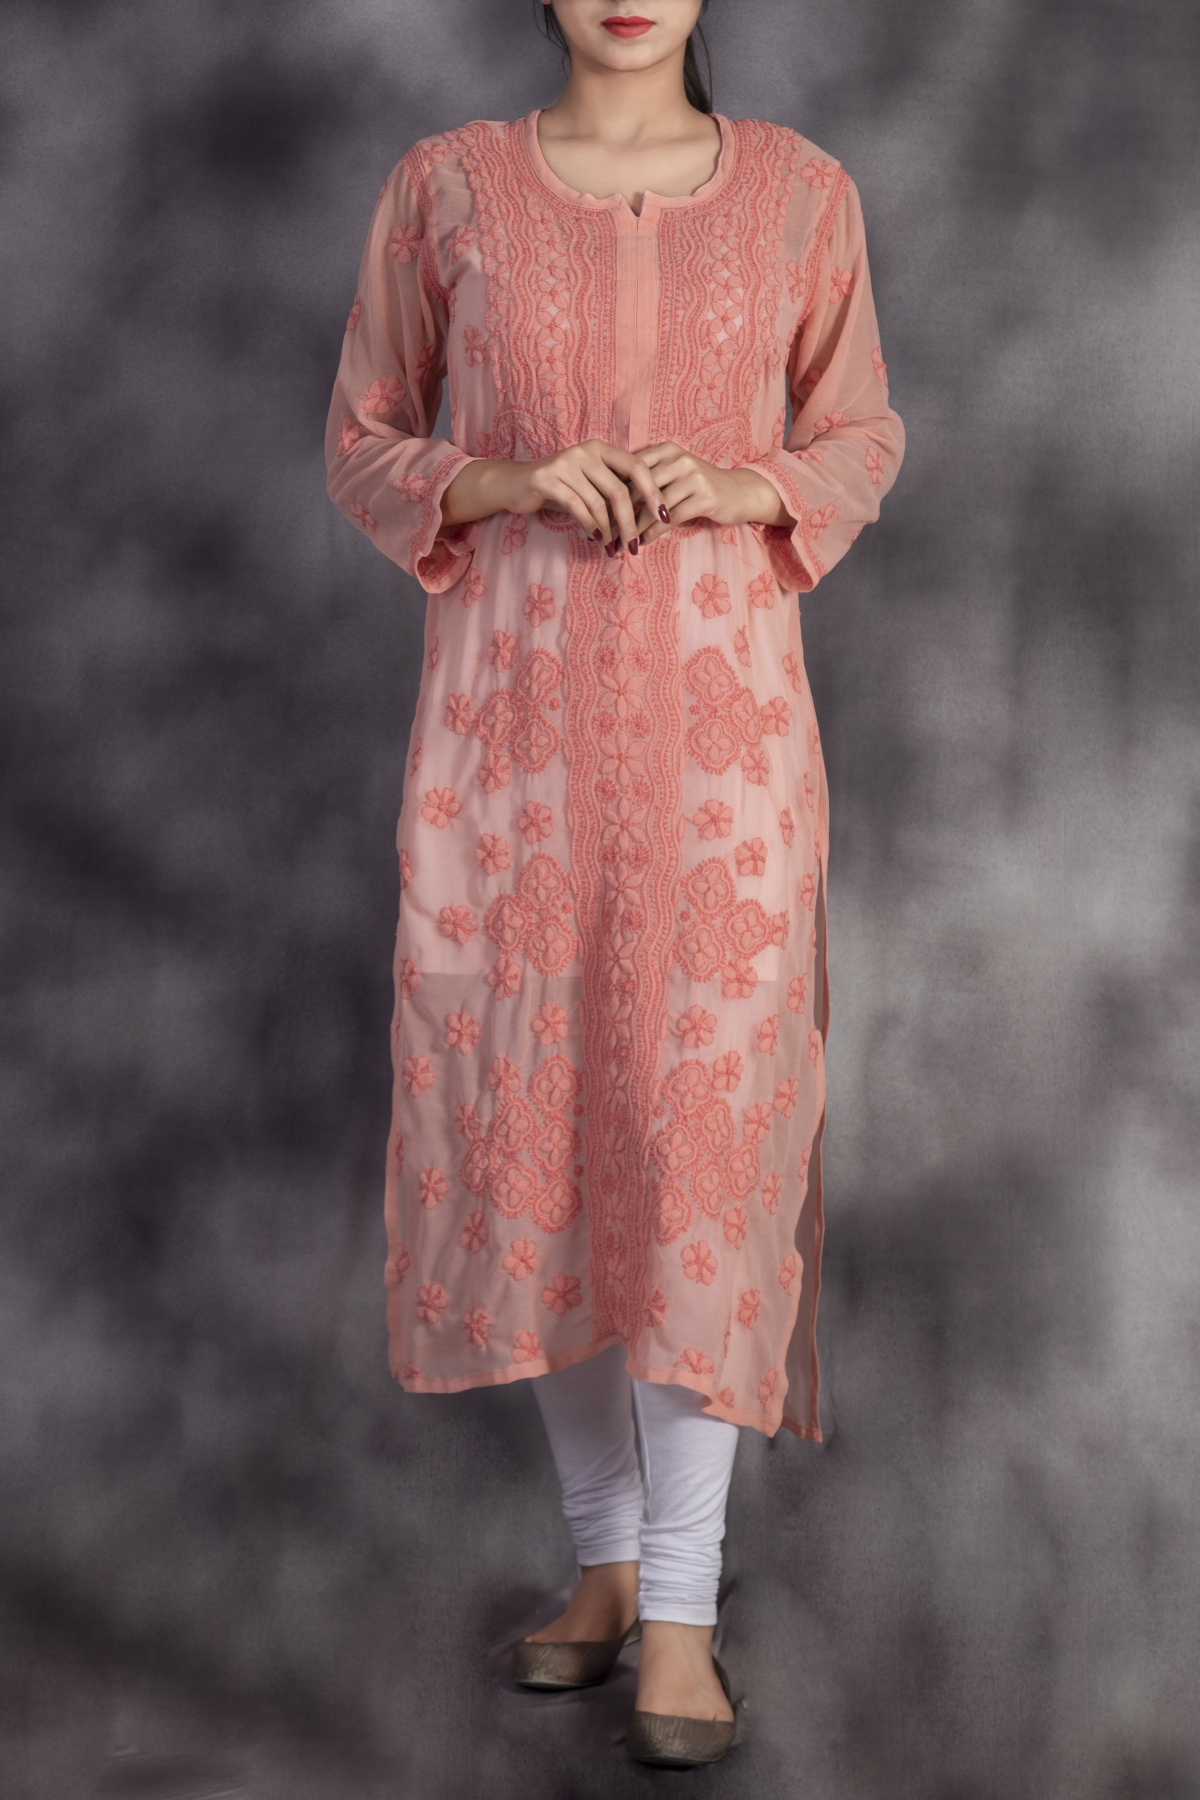 Cotton Lucknowi Chikan Stitched Kurti, Size: XL at Rs 300 in Lucknow